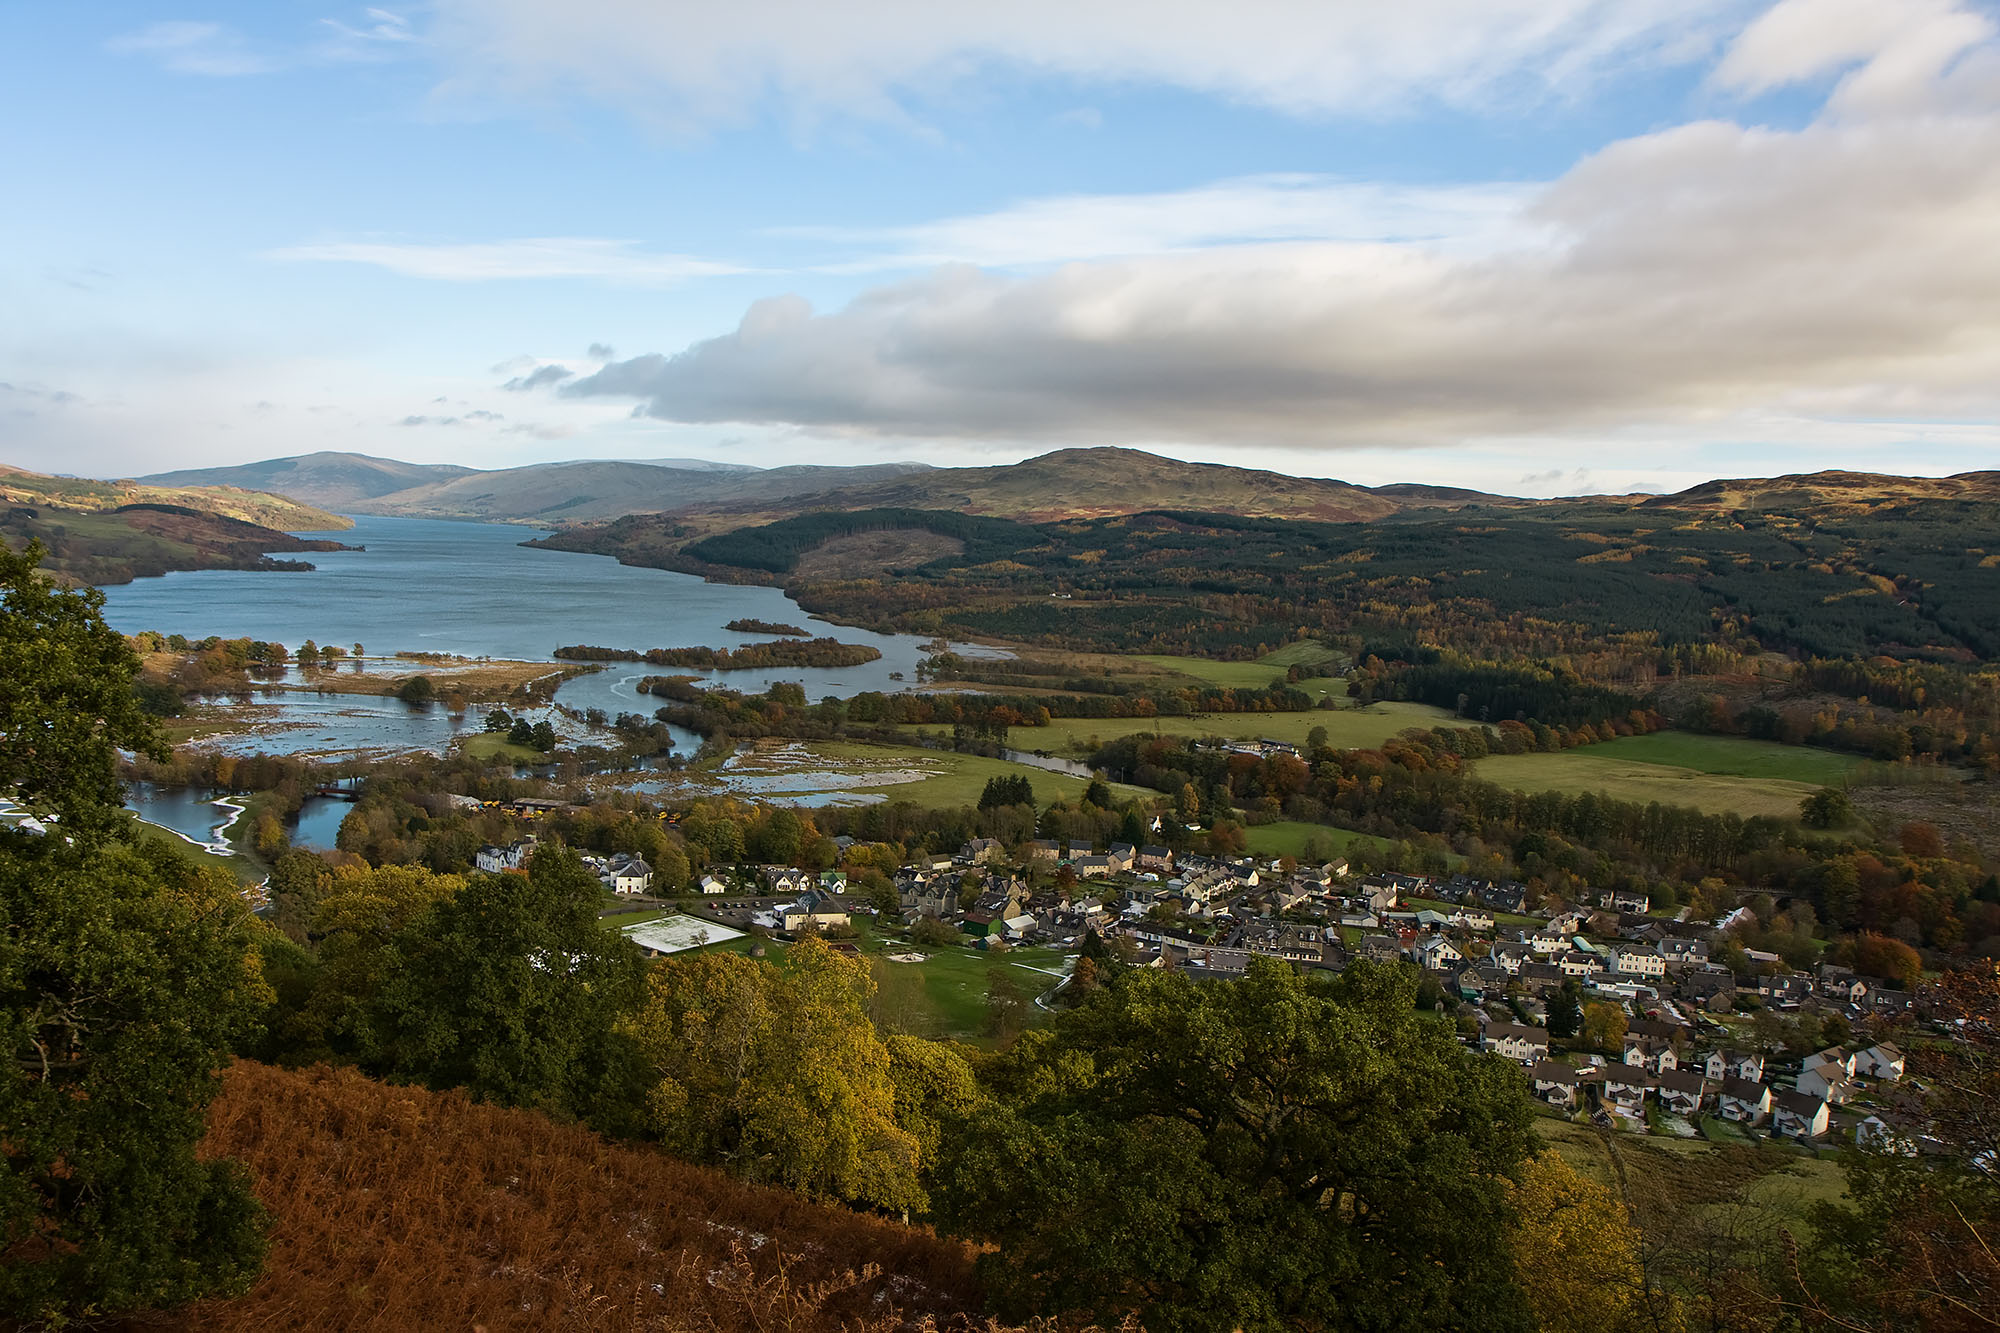 Loch Tay from the Sron a'Chlachain, above Killin